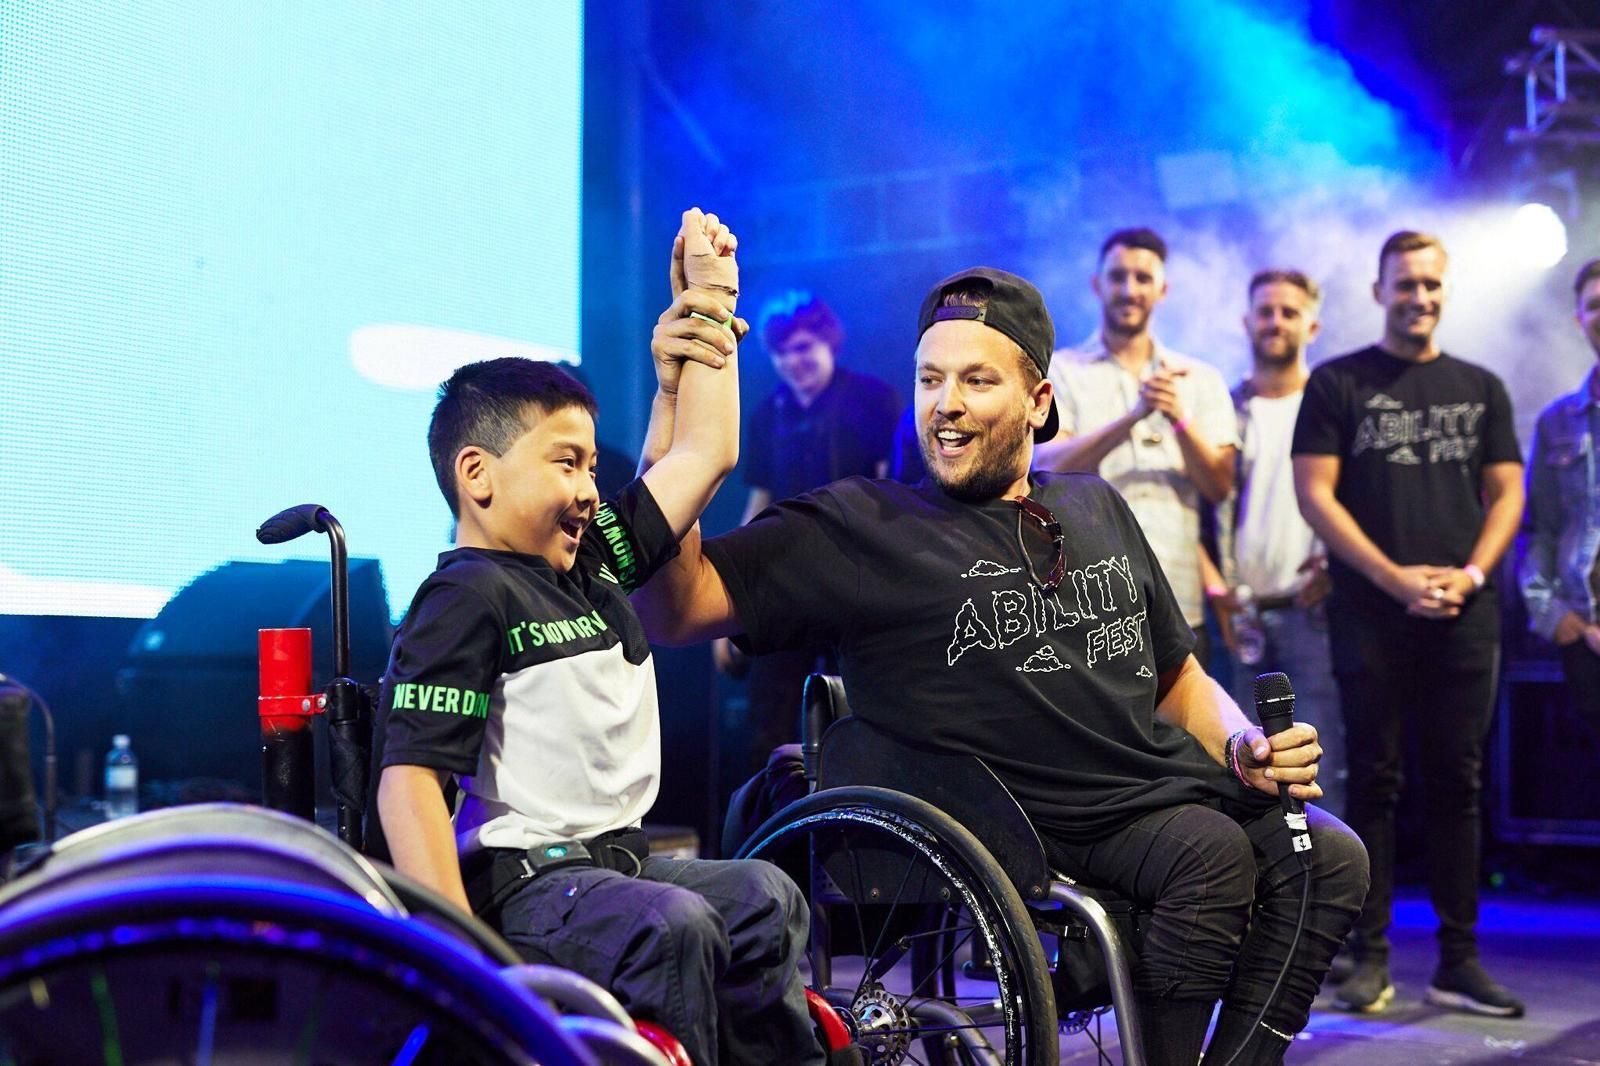 Recipient Jin (left) and Dylan (right) holding hands raised on stage at Ability Fest. Both are wheelchair users. 